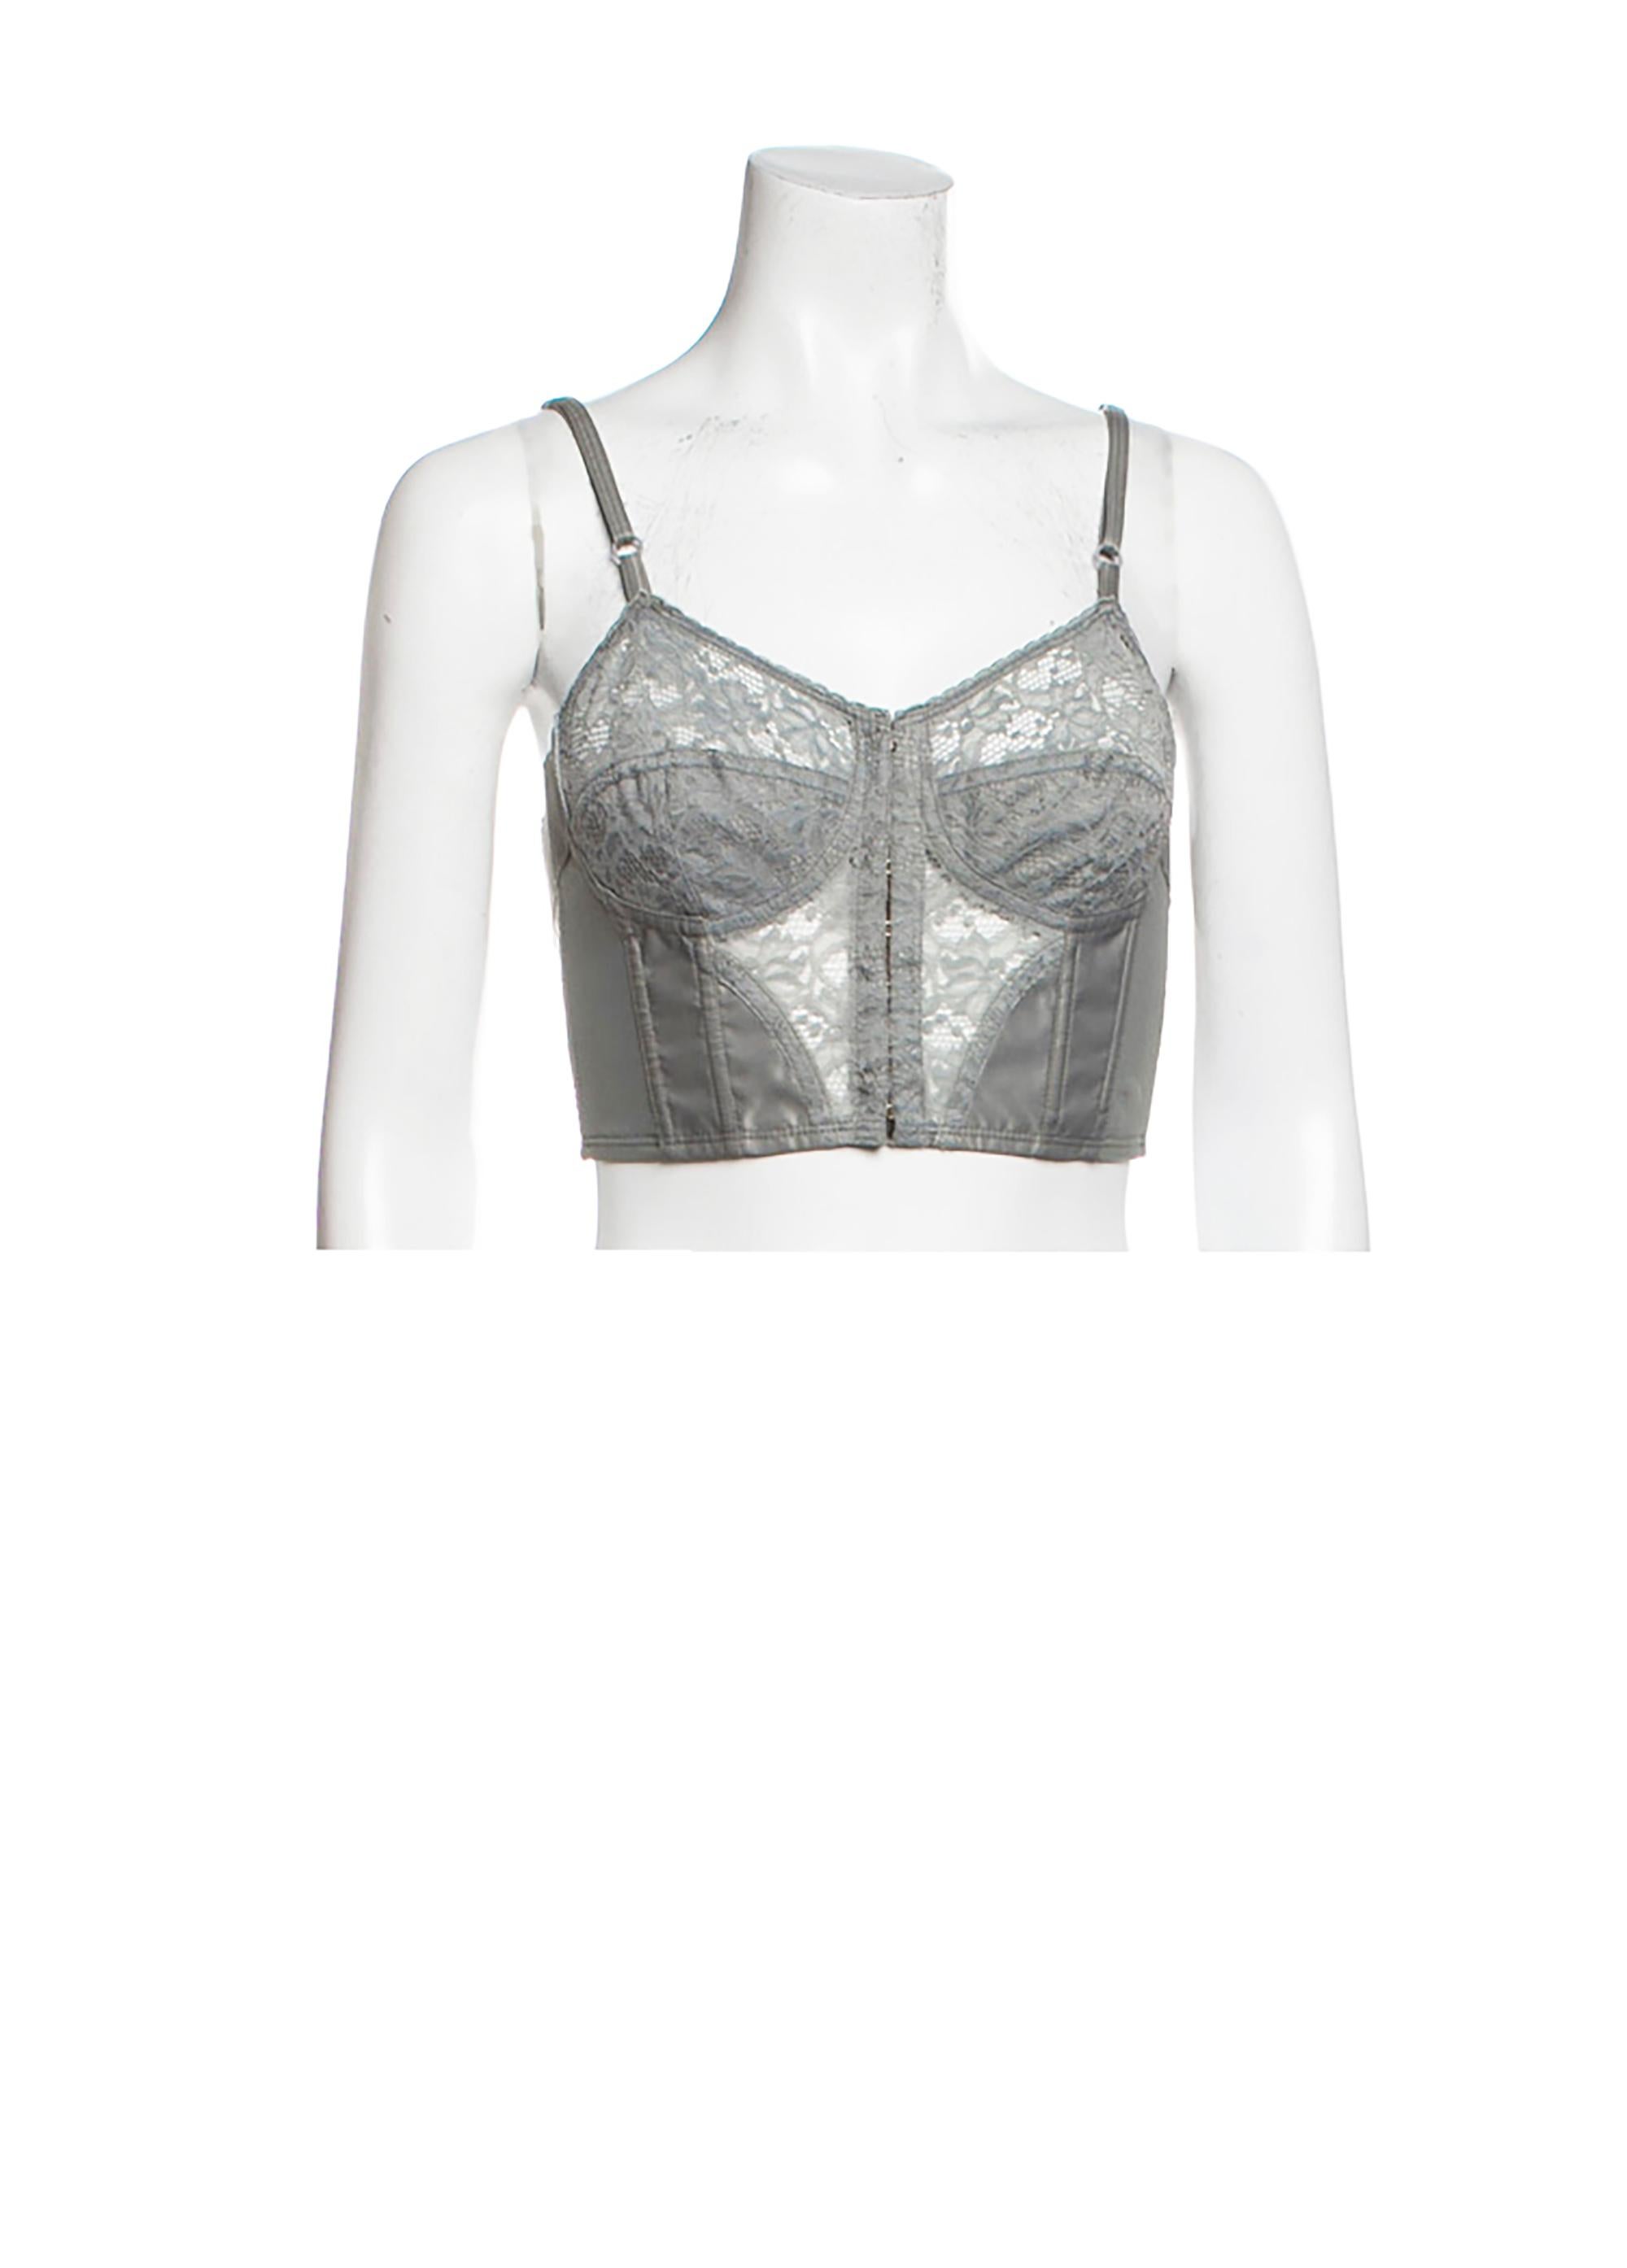 Dolce & Gabbana Grey Lace Crop Top with Hook and Eye Closure at Front In Excellent Condition In Austin, TX